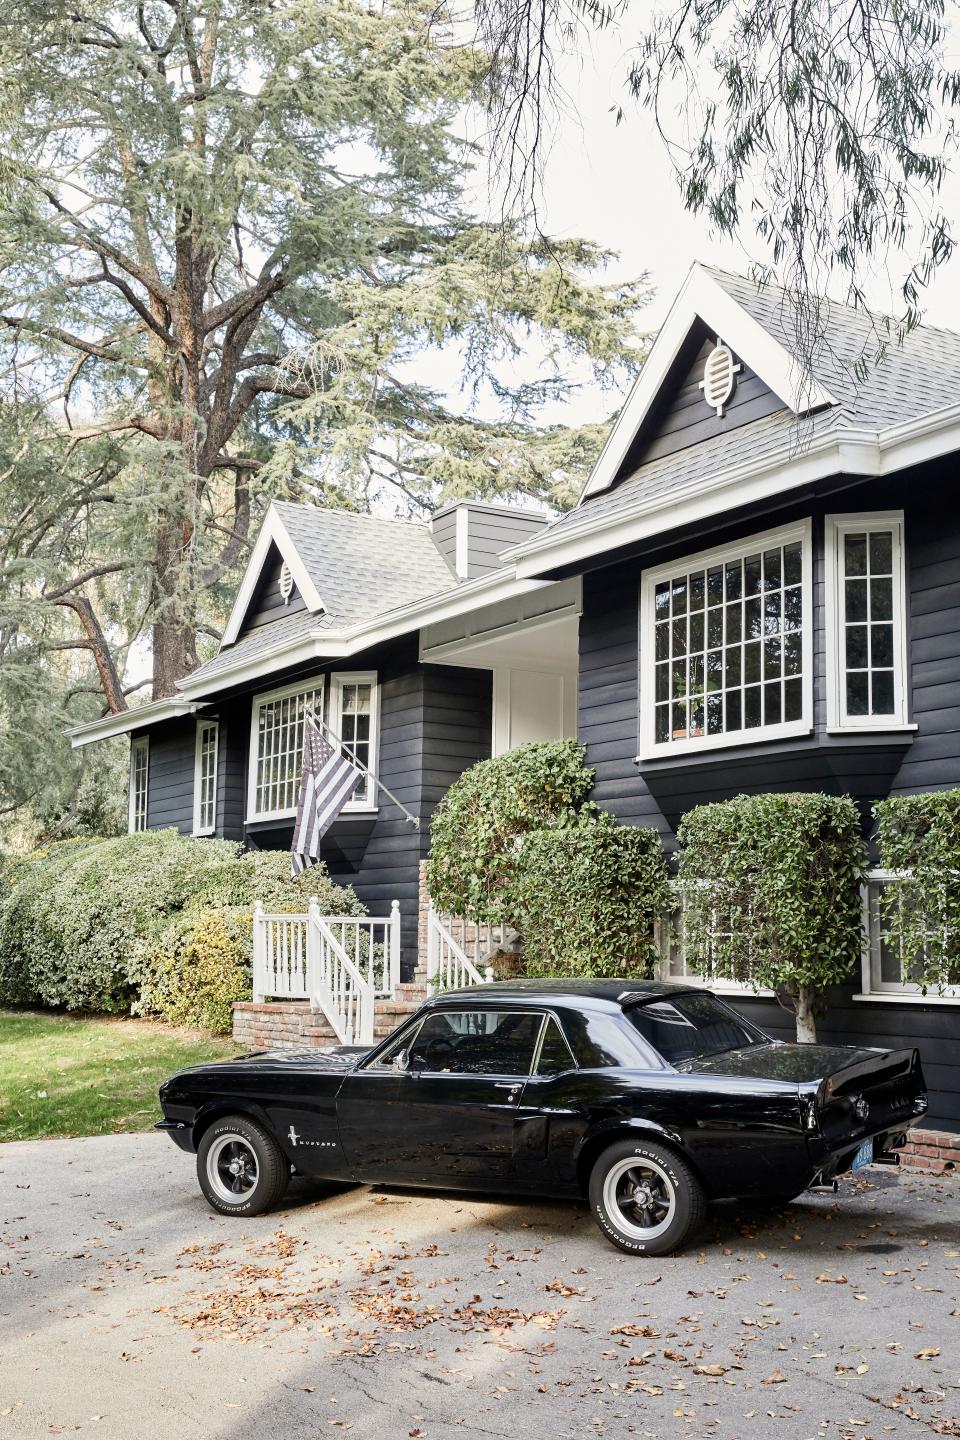 Valderrama’s 1967 Ford Mustang sits outside his Tarzana home, which he purchased from fellow actor Chuck Norris and renovated over the course of years.